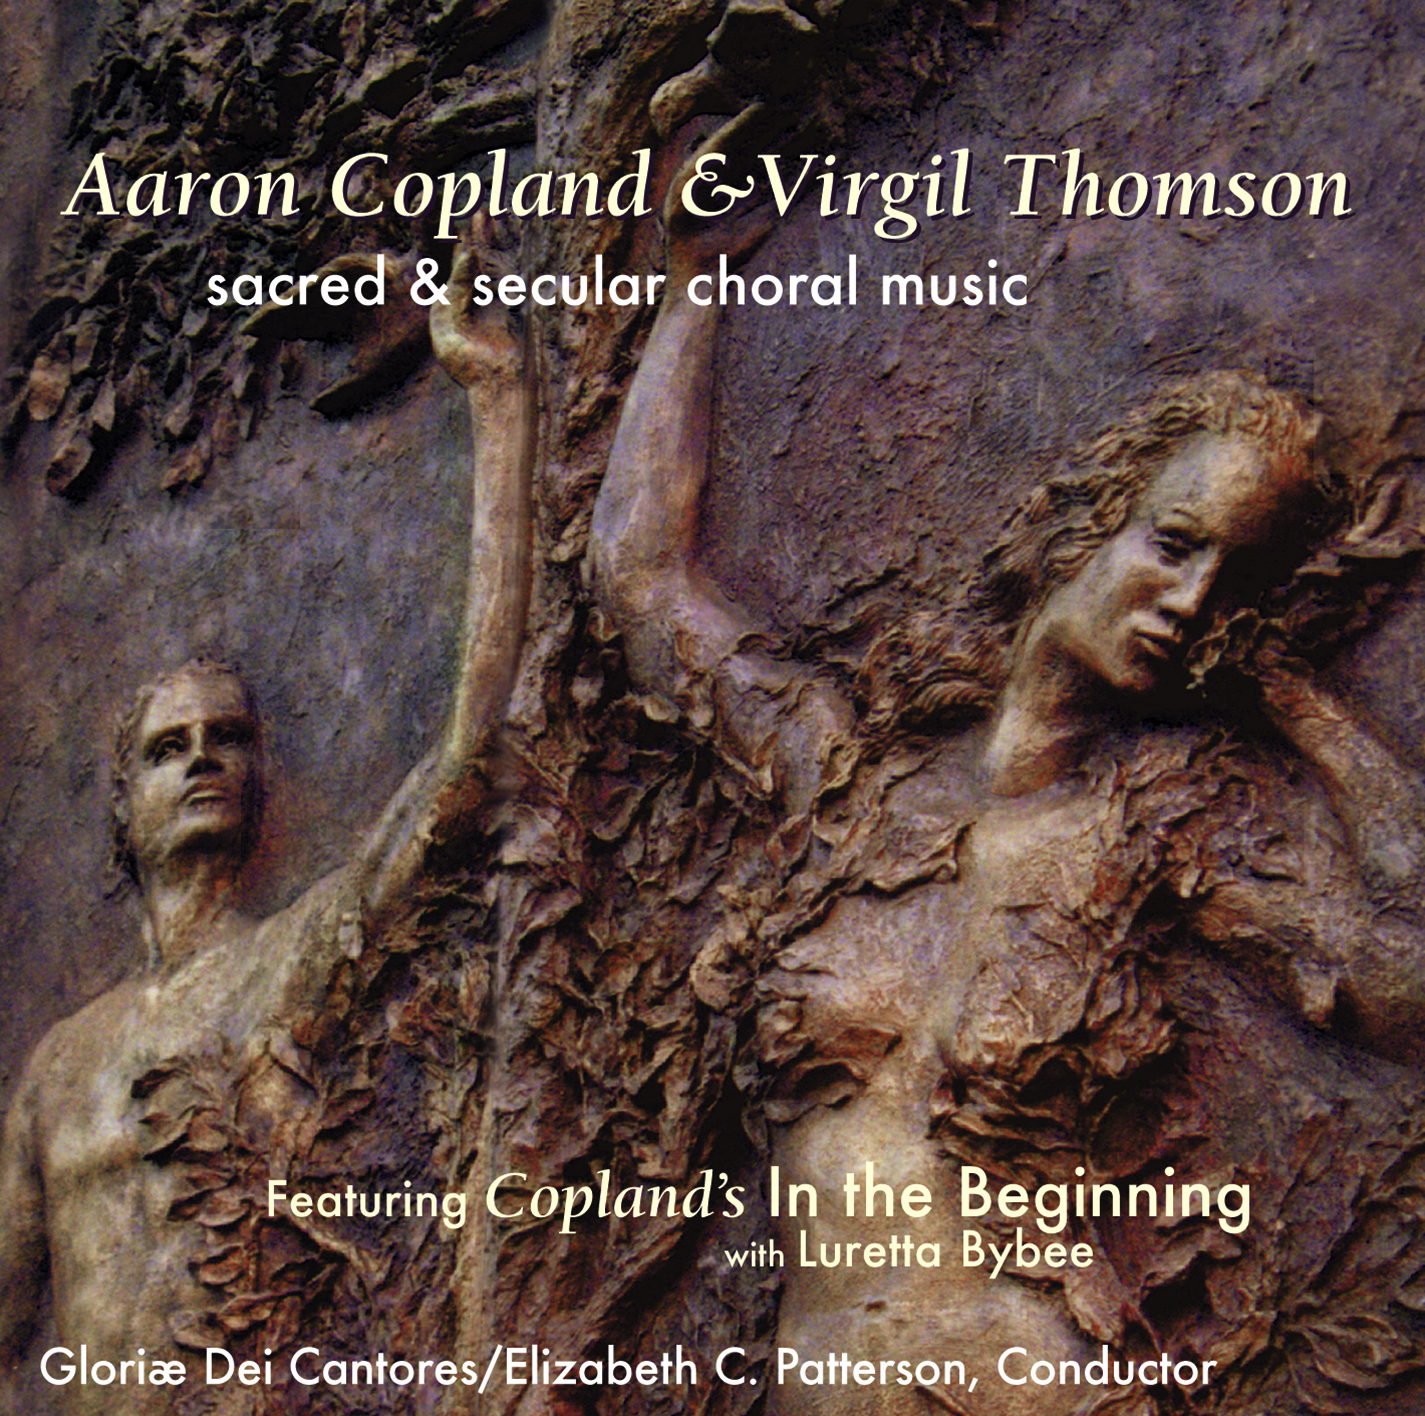 product image of 'Aaron Copland & Virgil Thomson: Sacred & Secular Music' Gloriae Dei Cantores choral recording